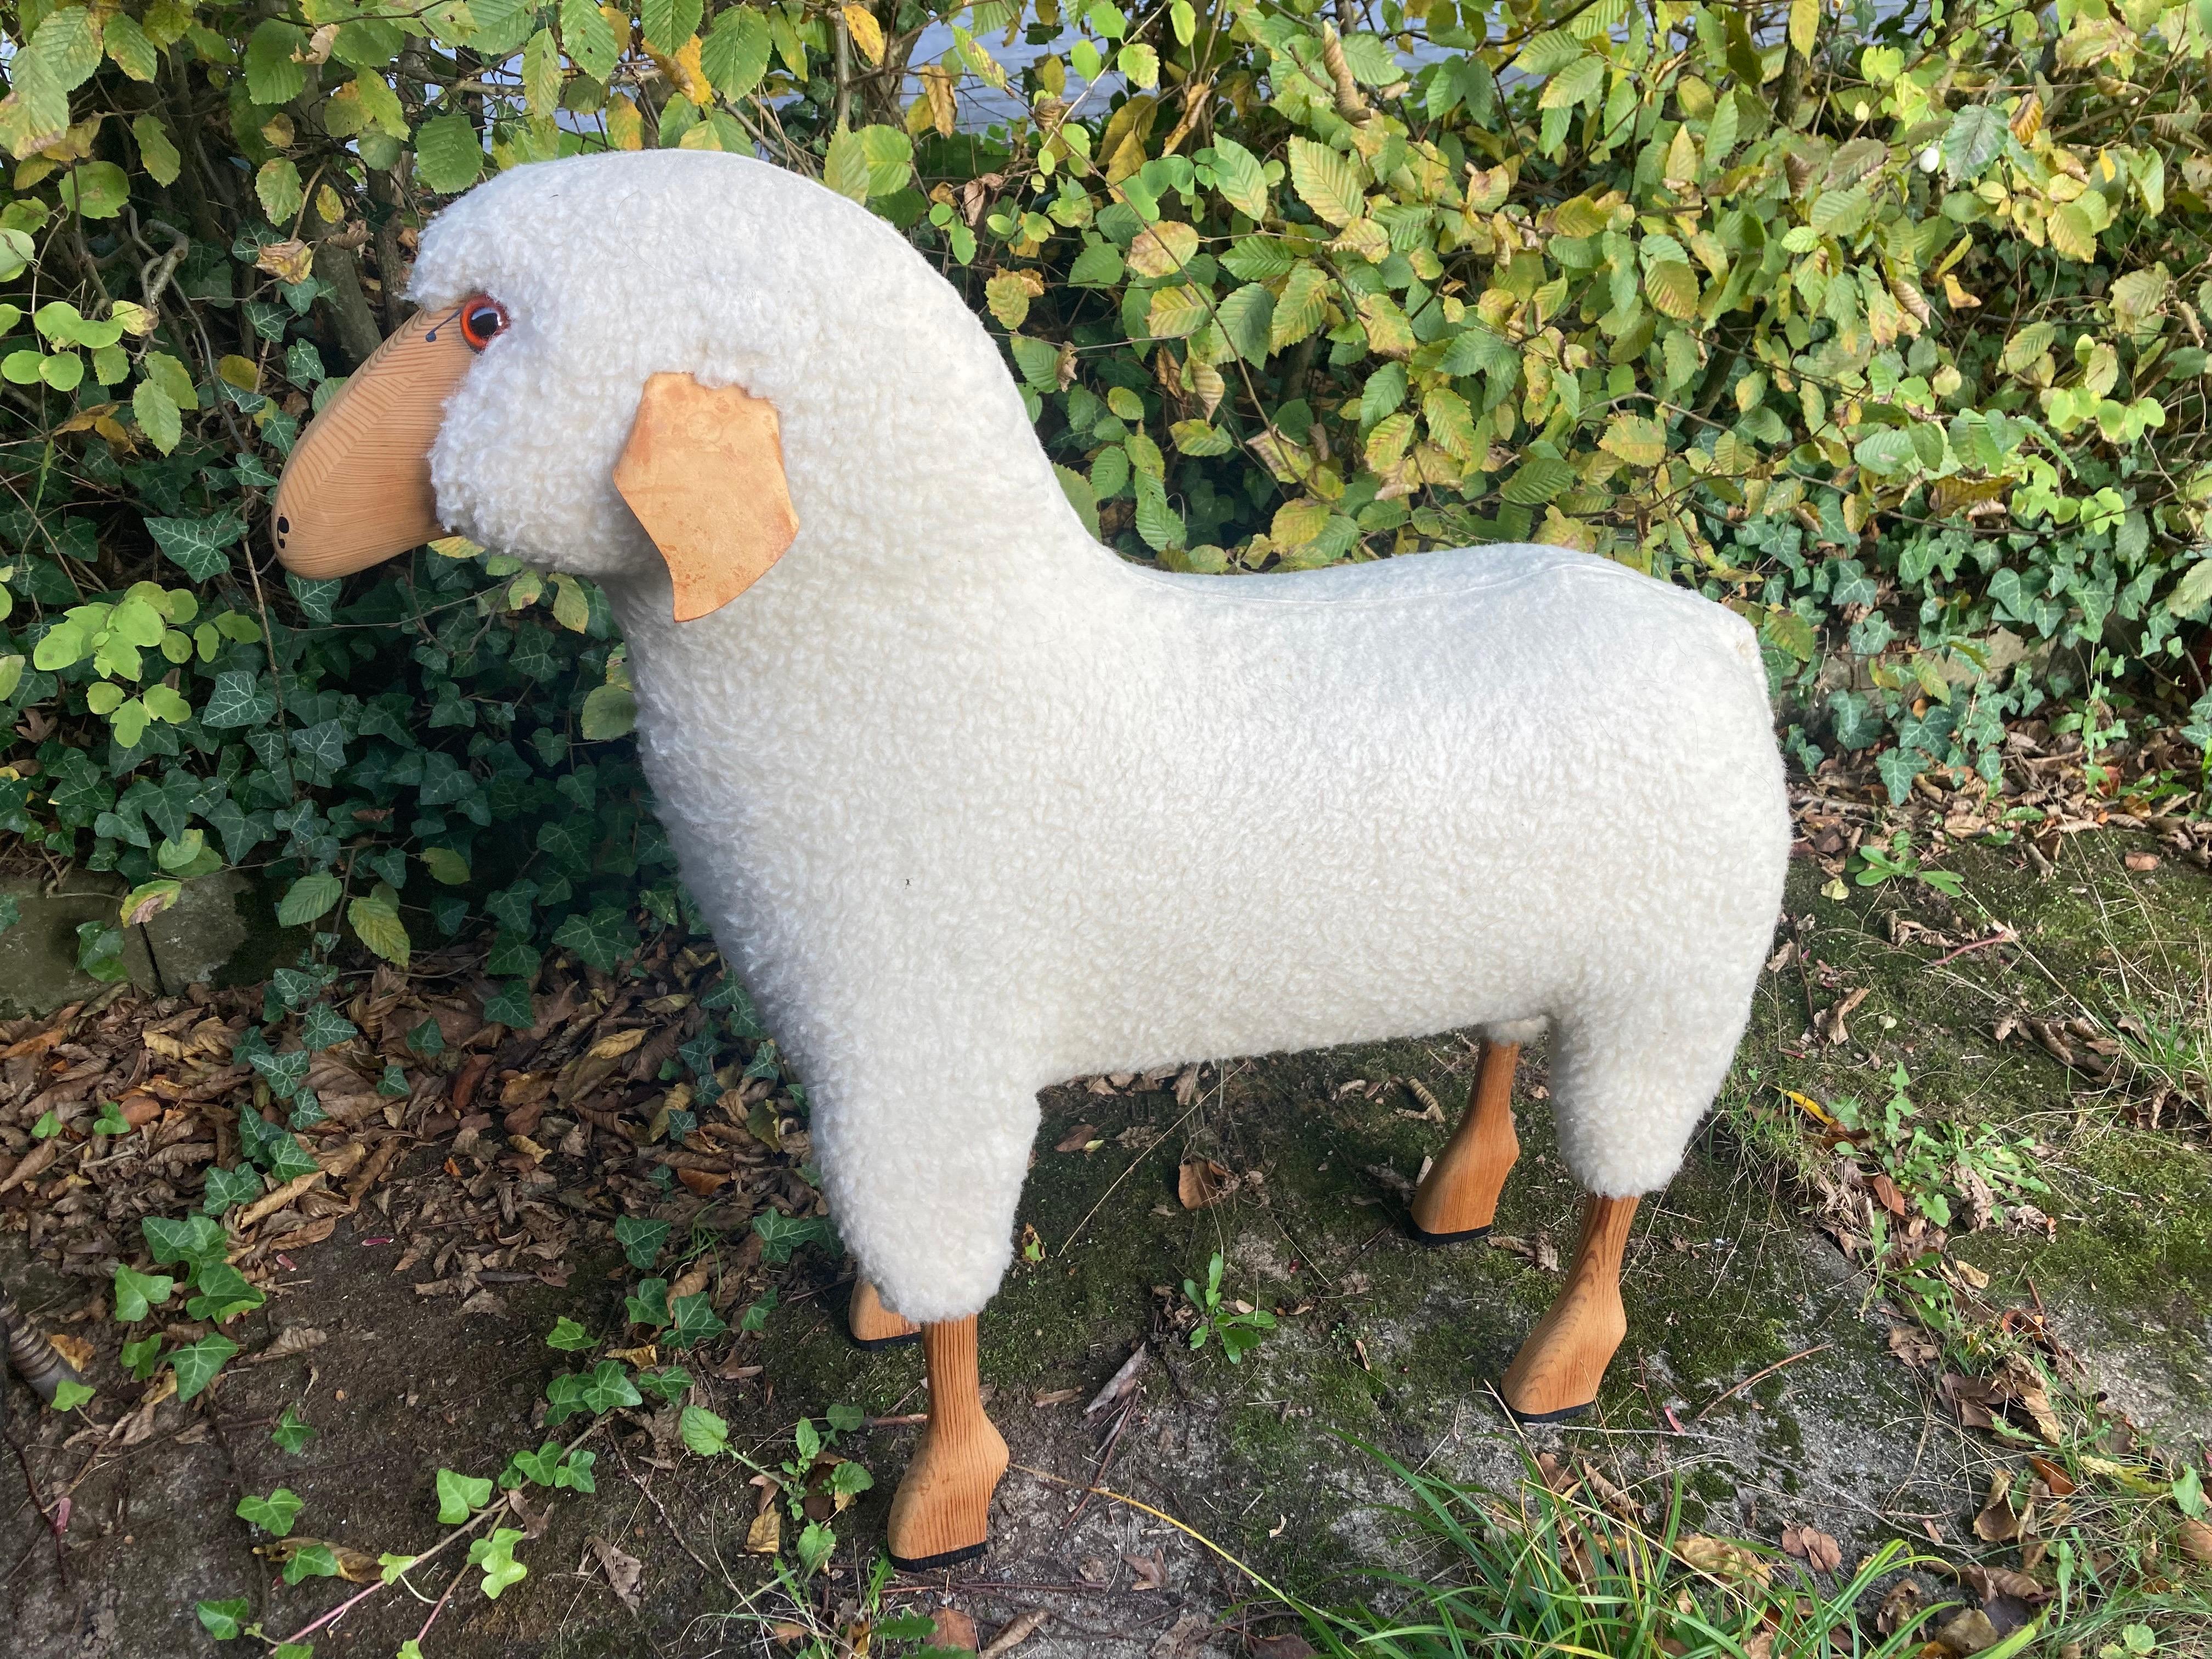 A large life -size white wool sheep by Hans-Peter Krafft. 1970s. Made in Germany. 
The sheep was handmade from original white wool, leather and solid high-quality beech wood. The entire production took place in Germany circa 1970.
The sheep